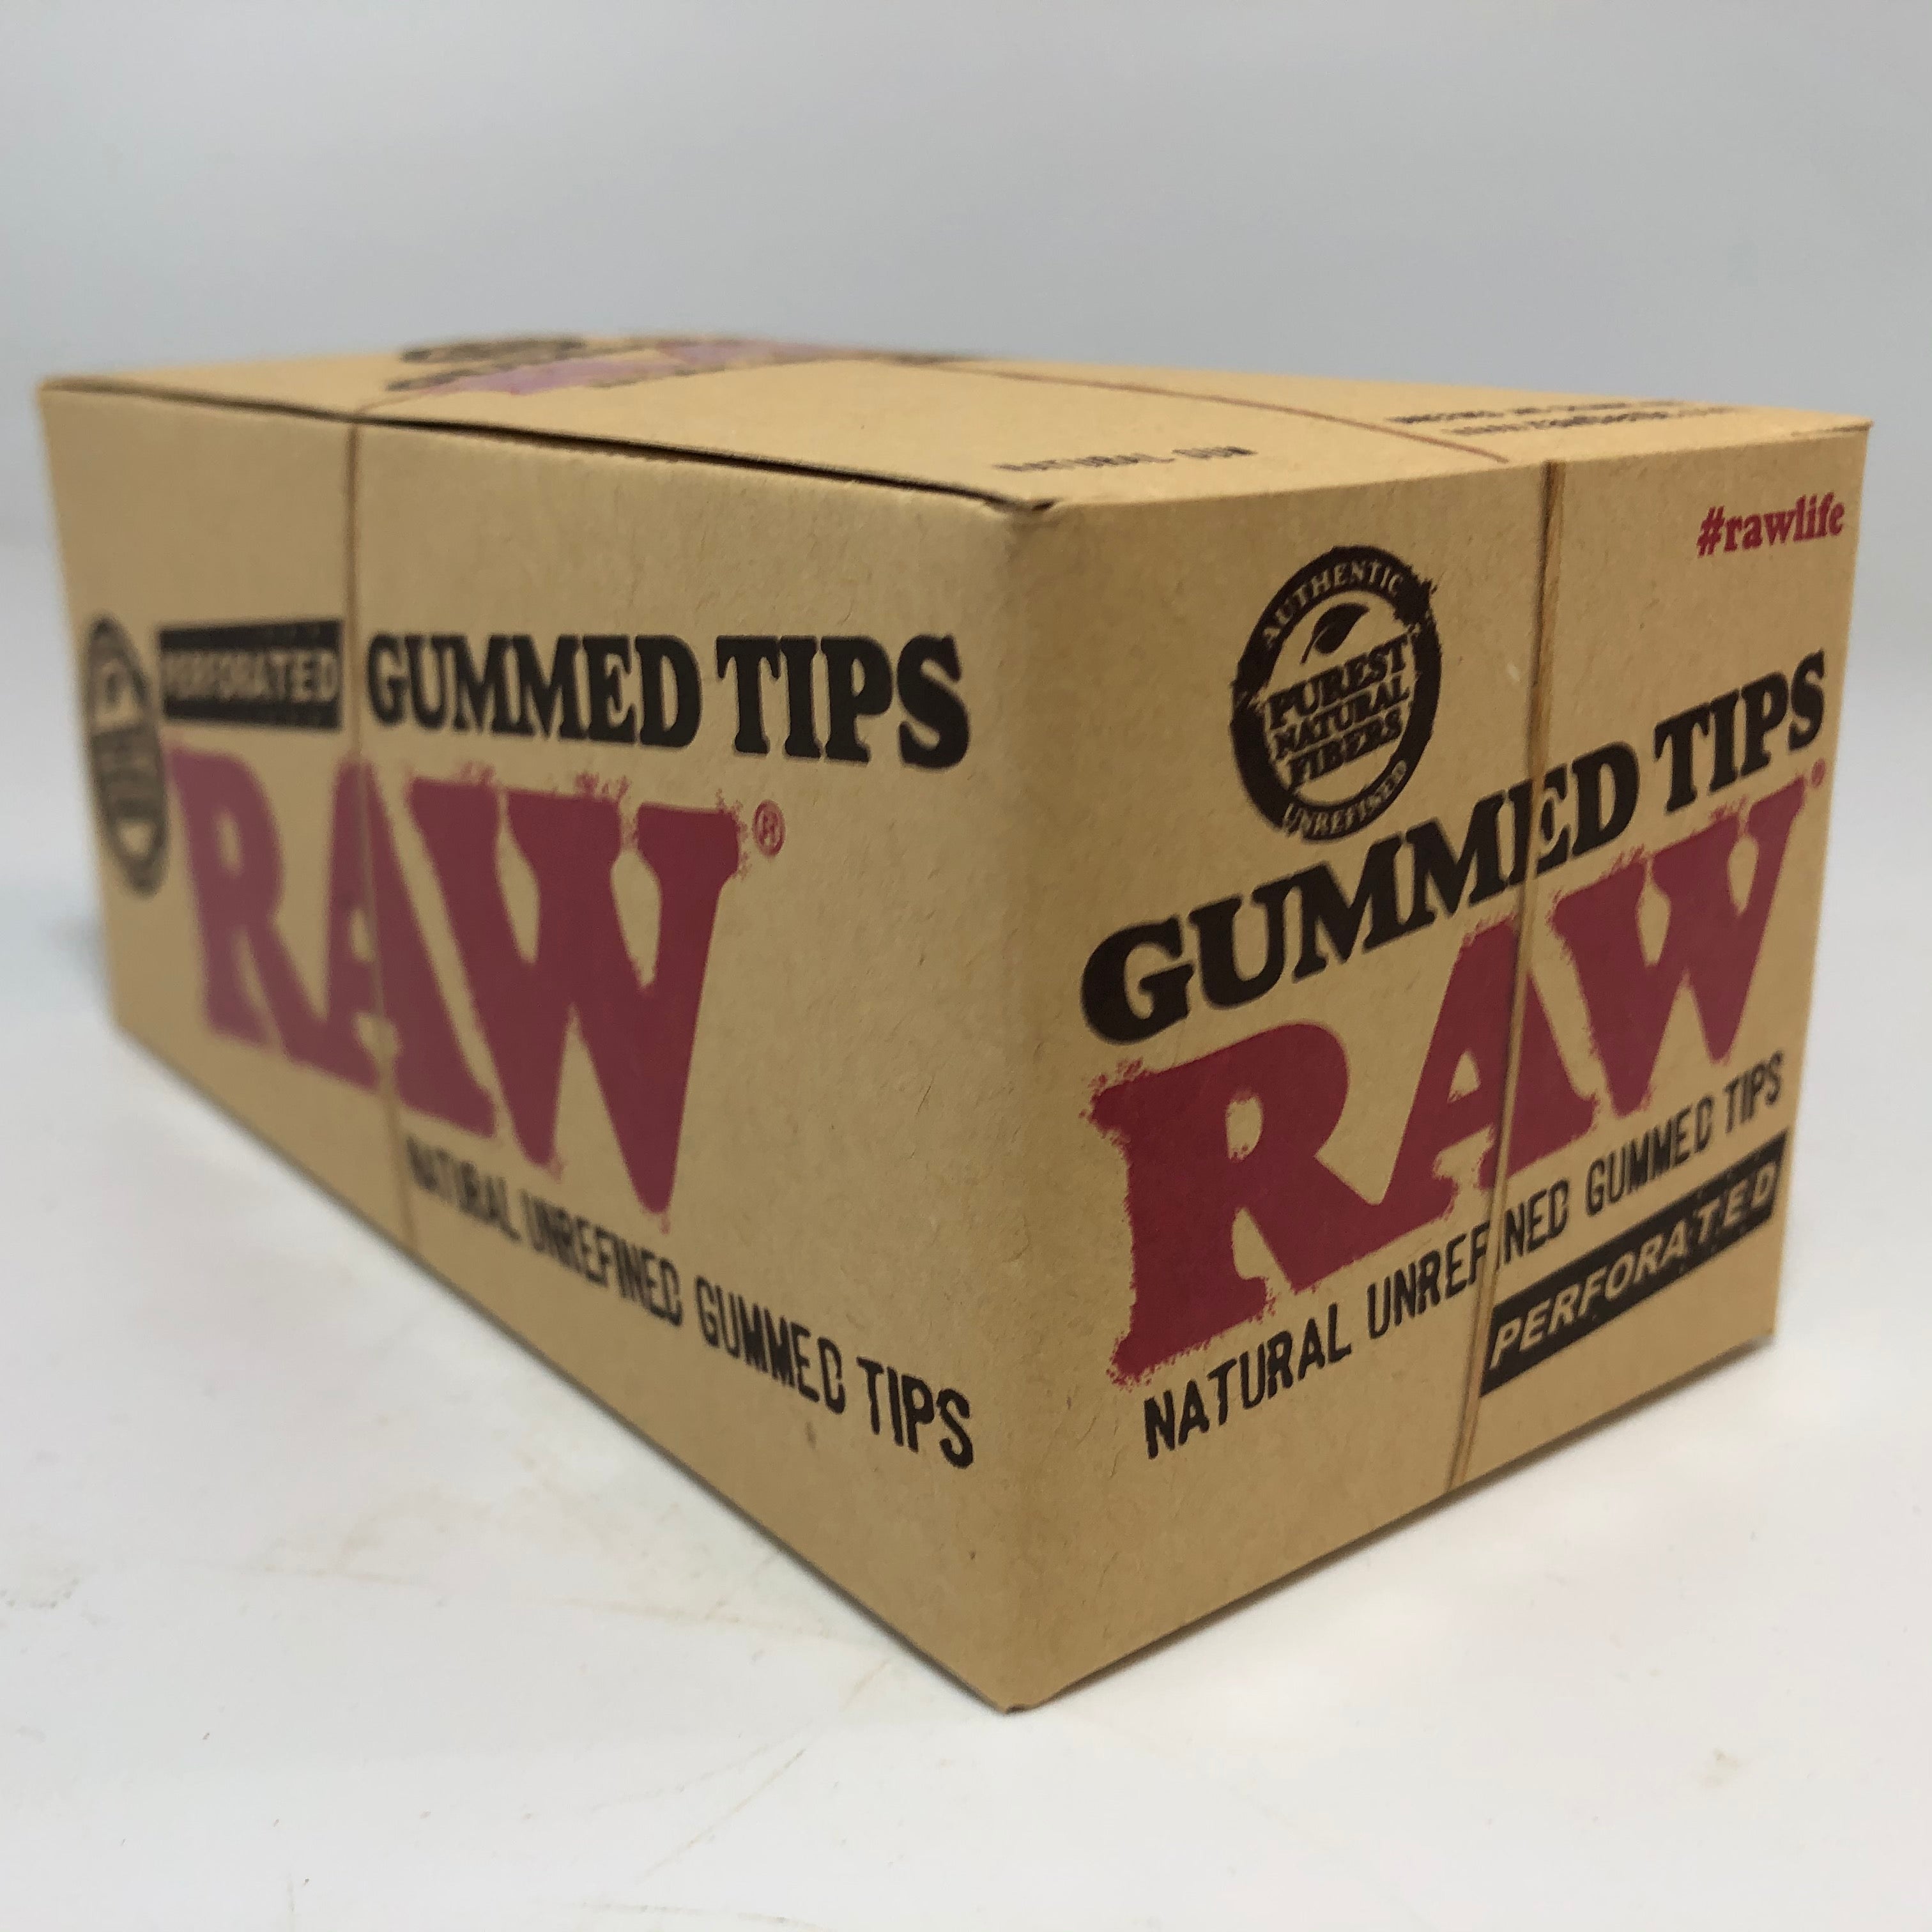 Raw Tips Gummed & Perforated -Single pack